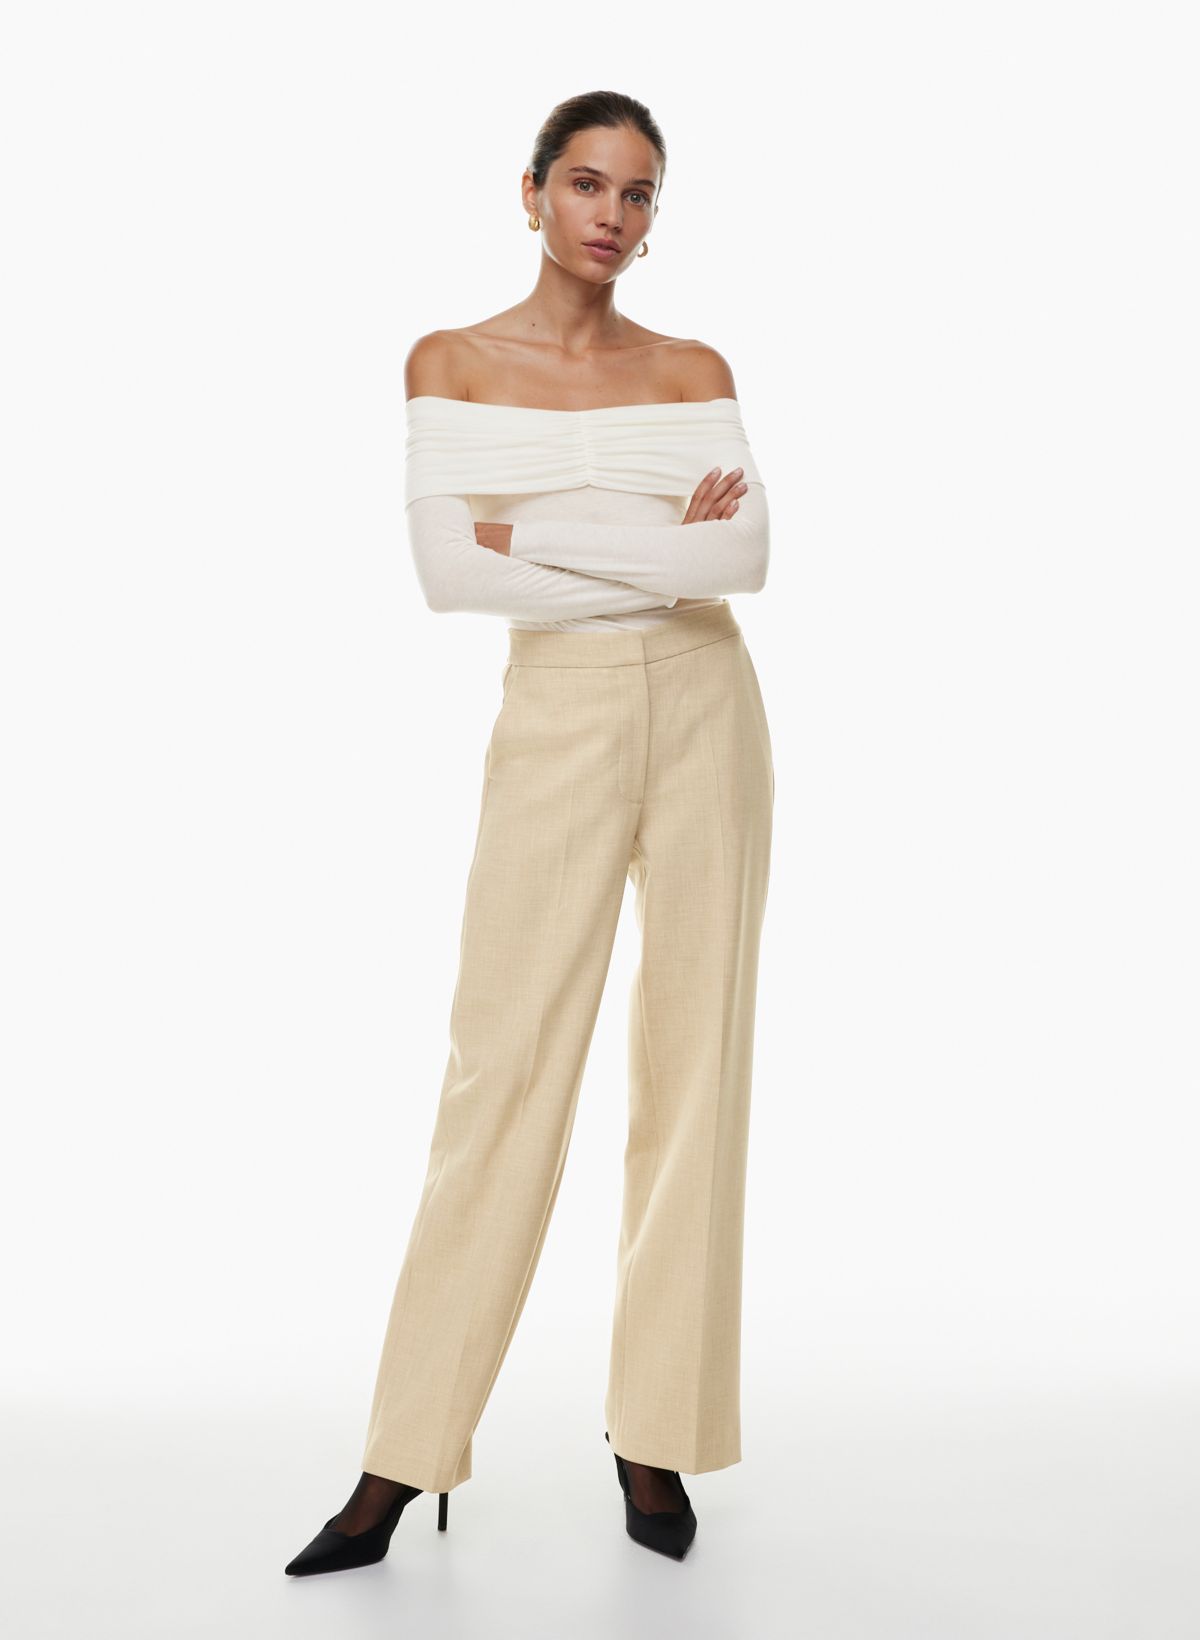  Other Stories polyester wide leg stretch pants in beige - BEIGE